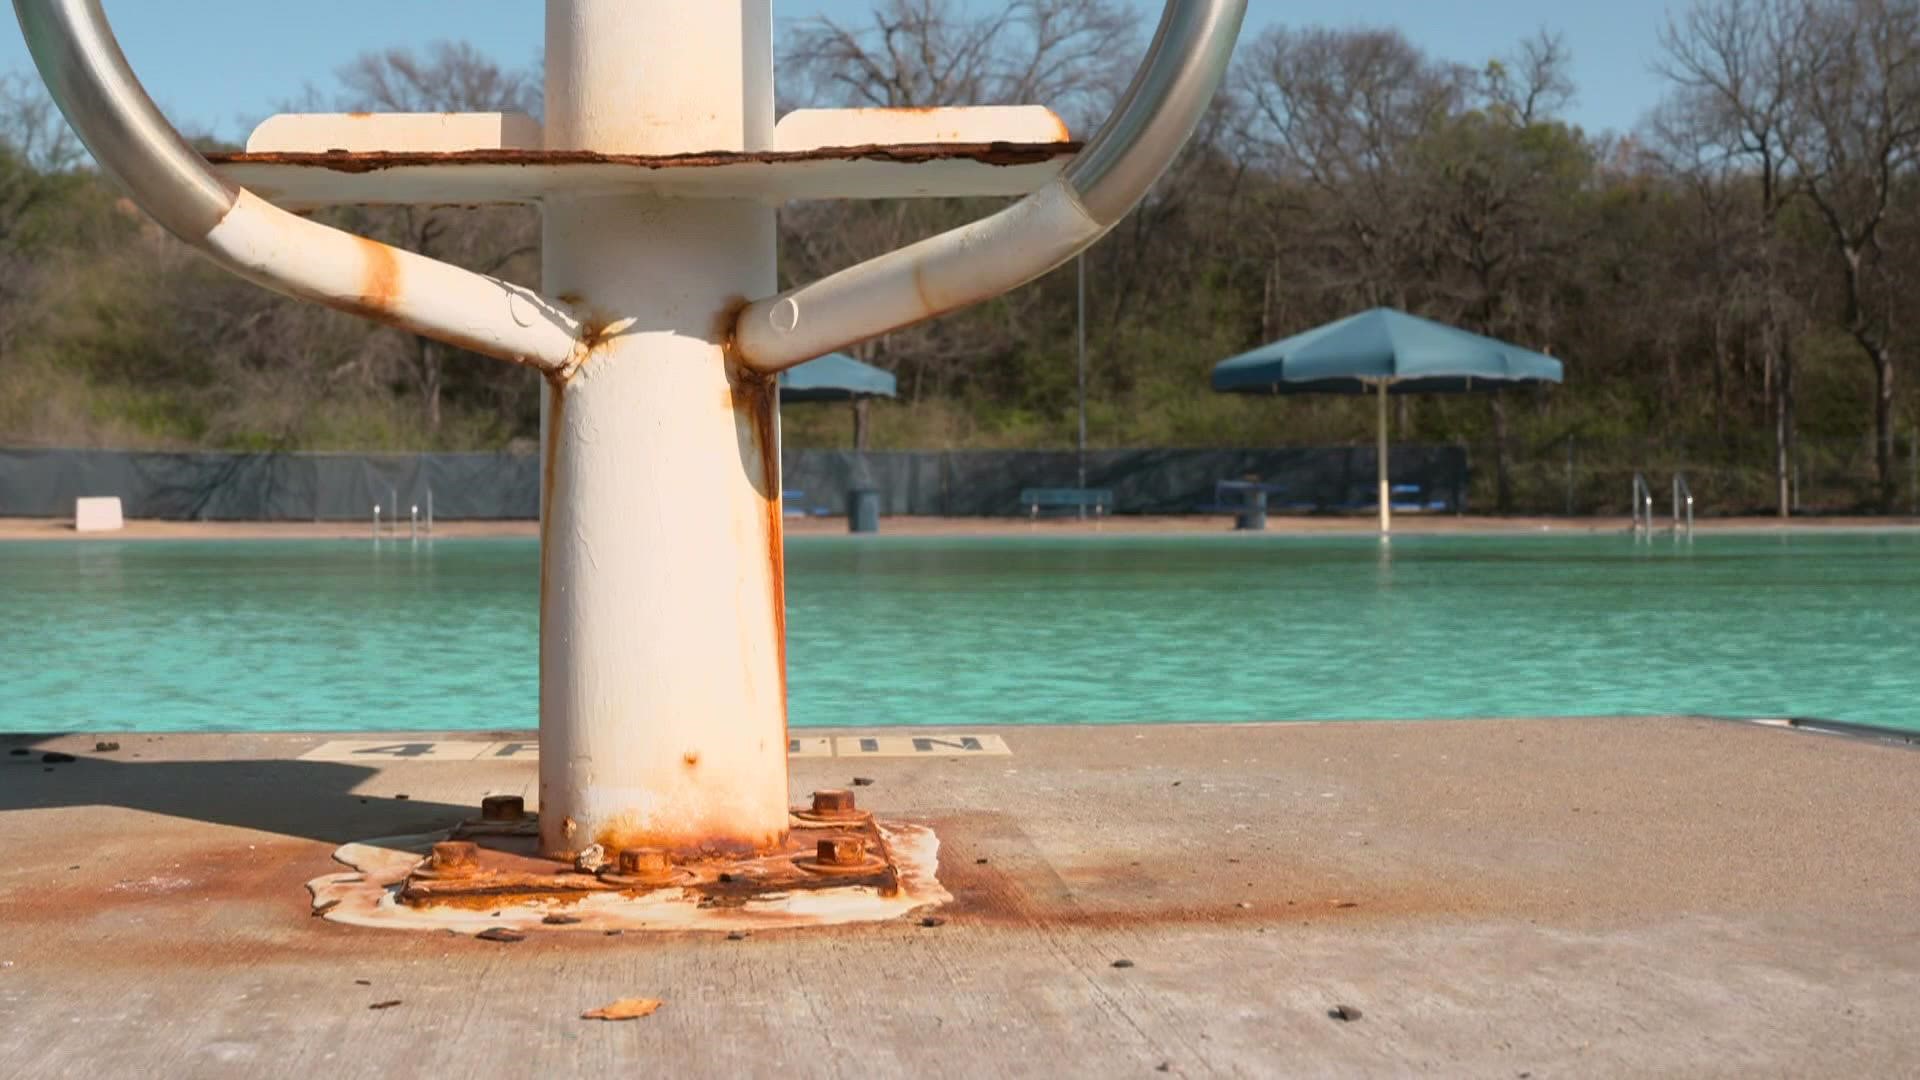 Residents complained about a plan to significantly shrink the size of Forest Park Pool. A new proposal keeps the Olympic-size pool - but costs $3.5 million more.